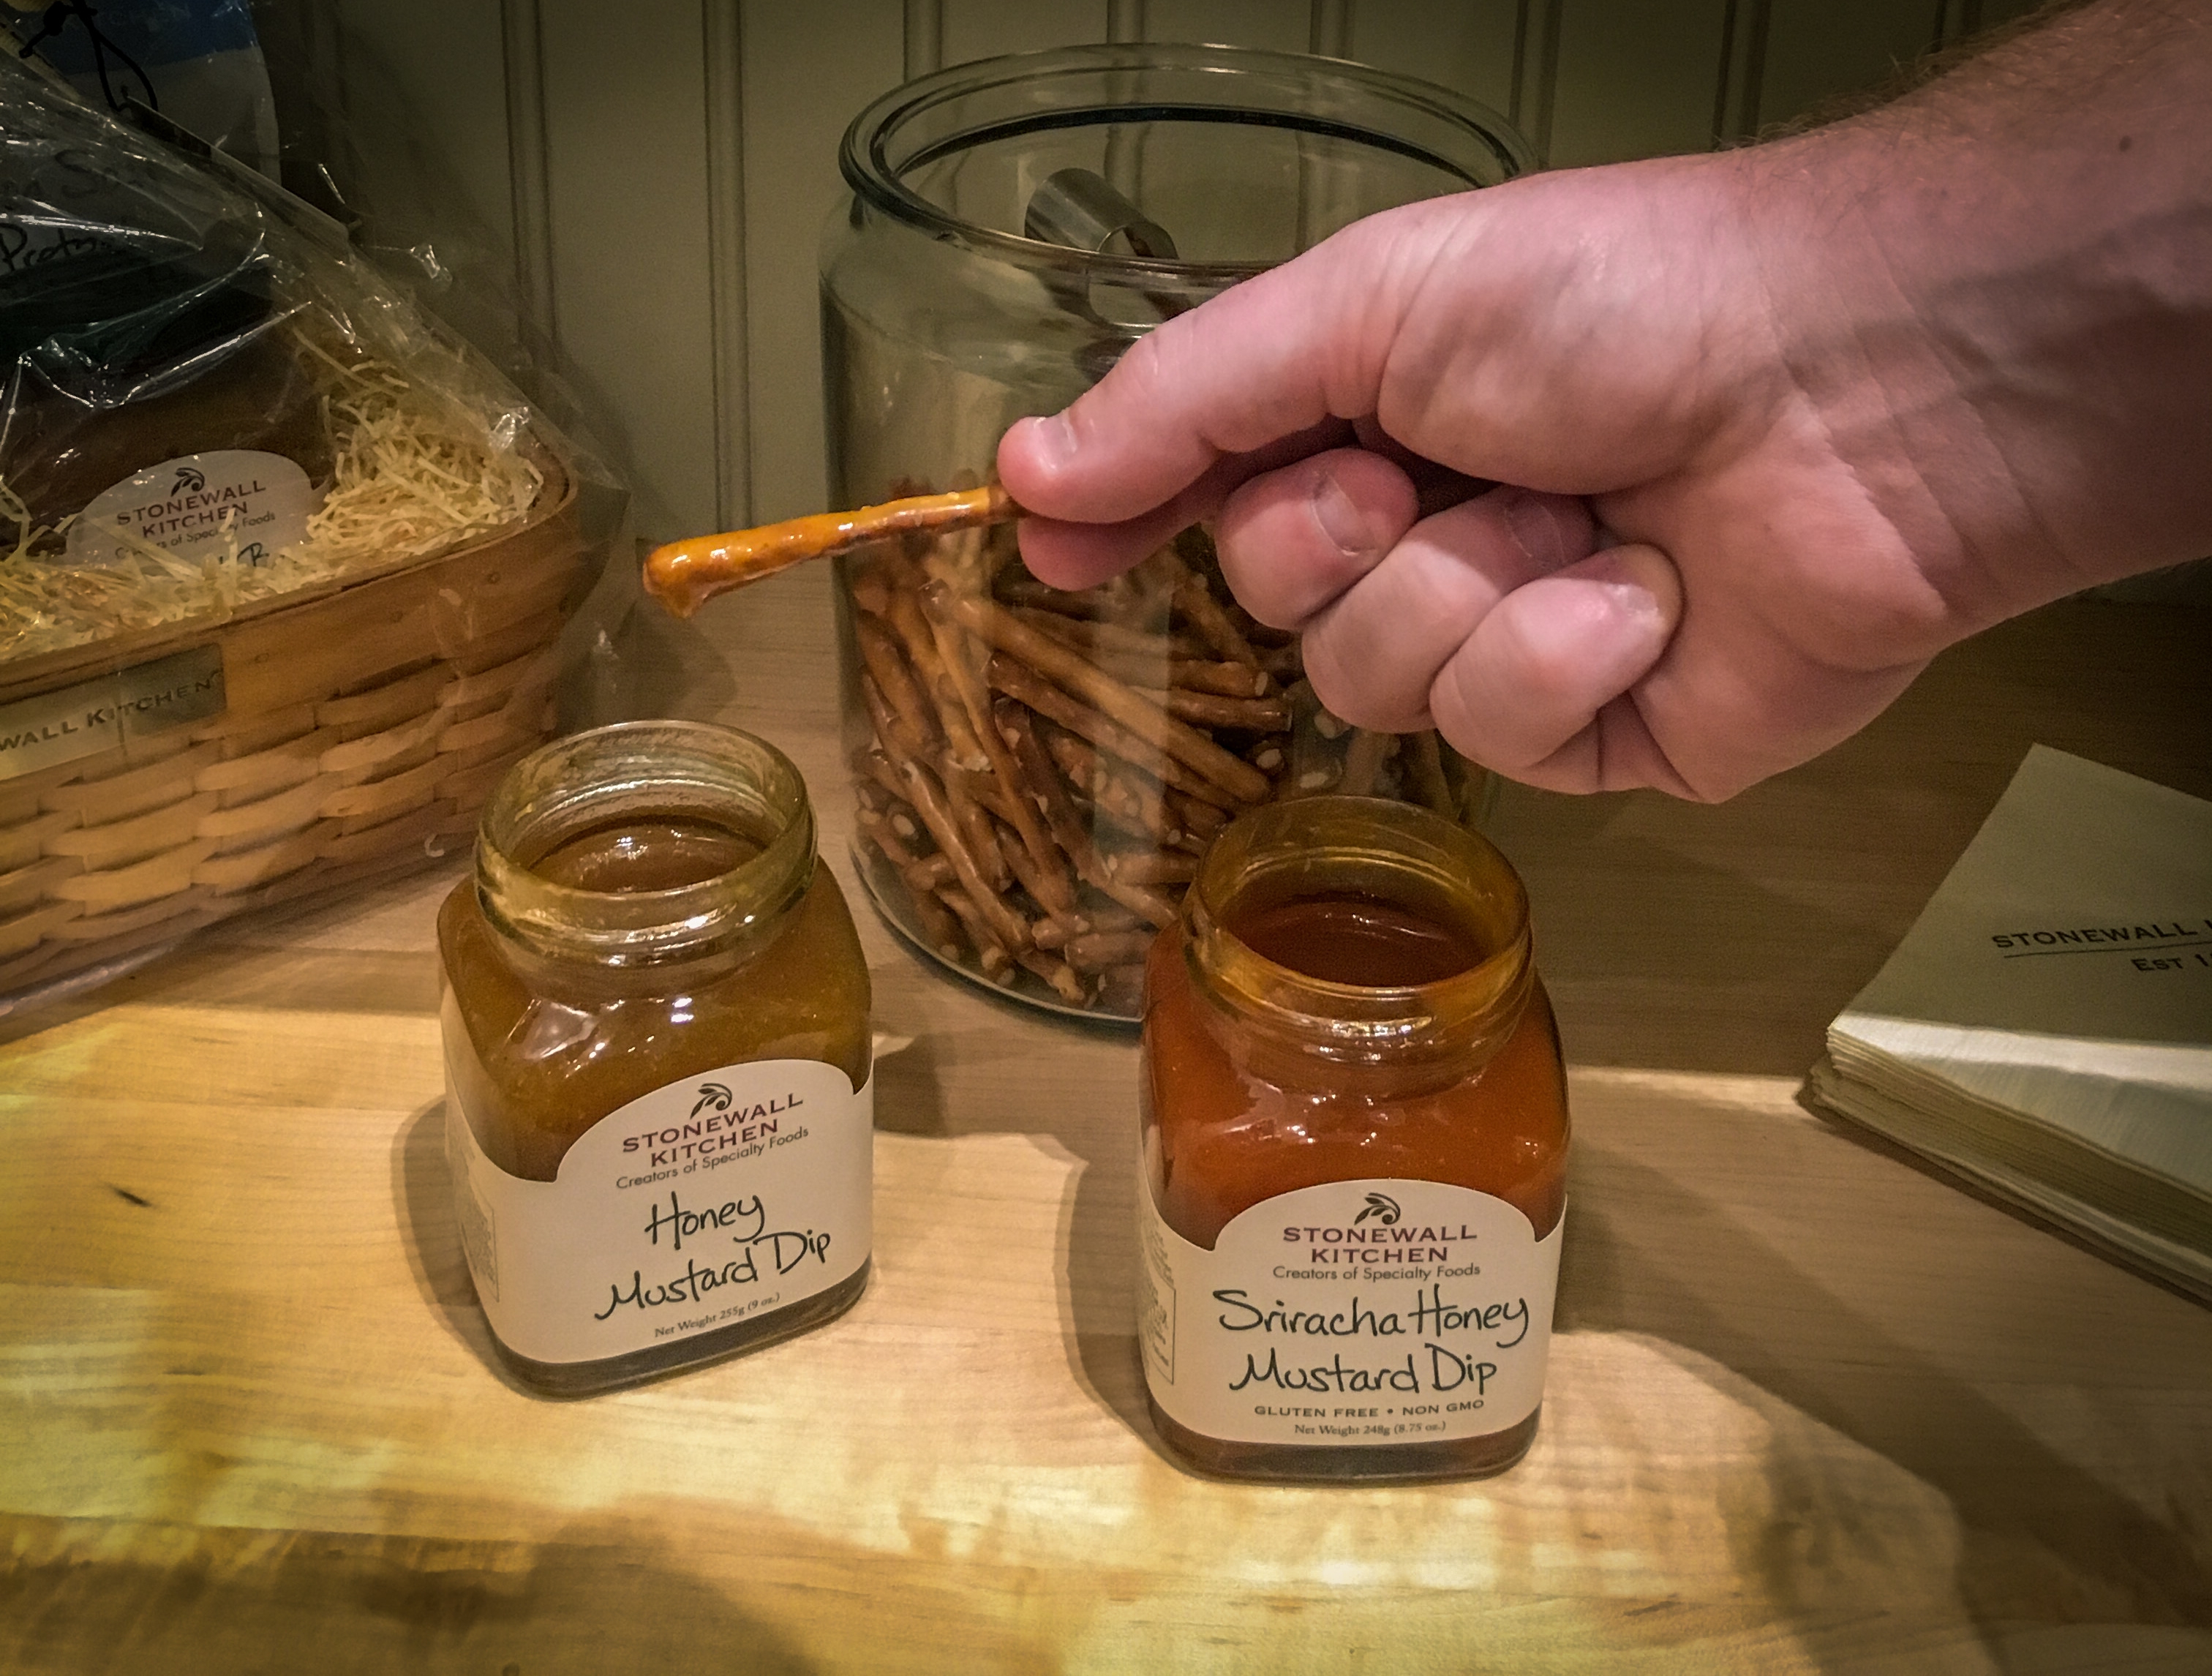 Sampling honey dips at the Stonewall Kitchen in Maine